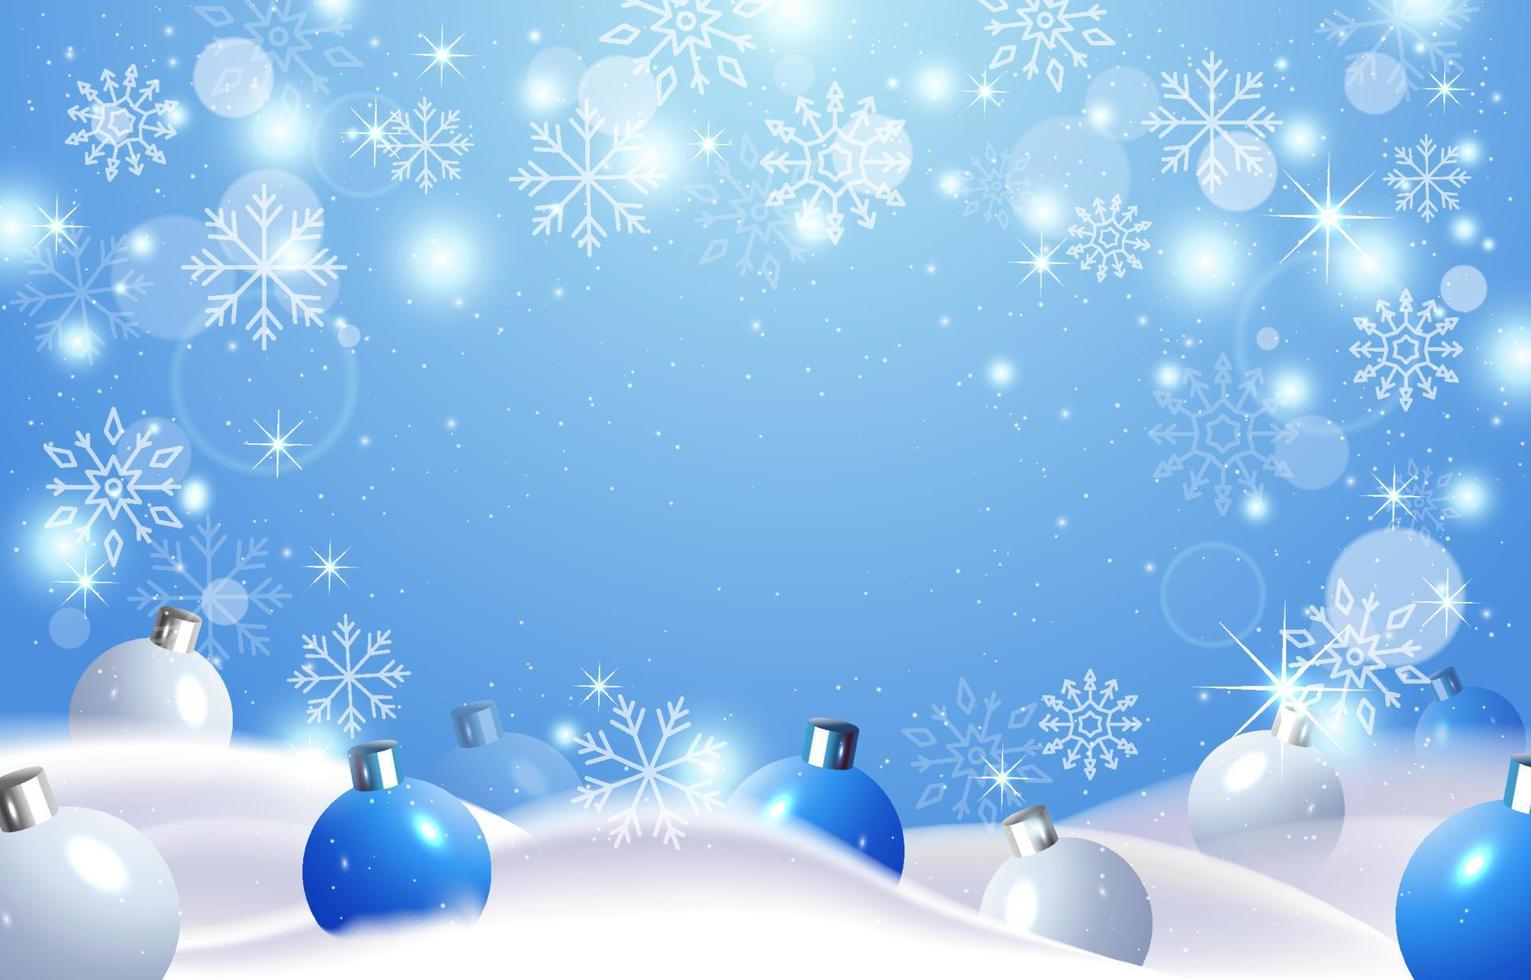 Winter Christmas Background vector